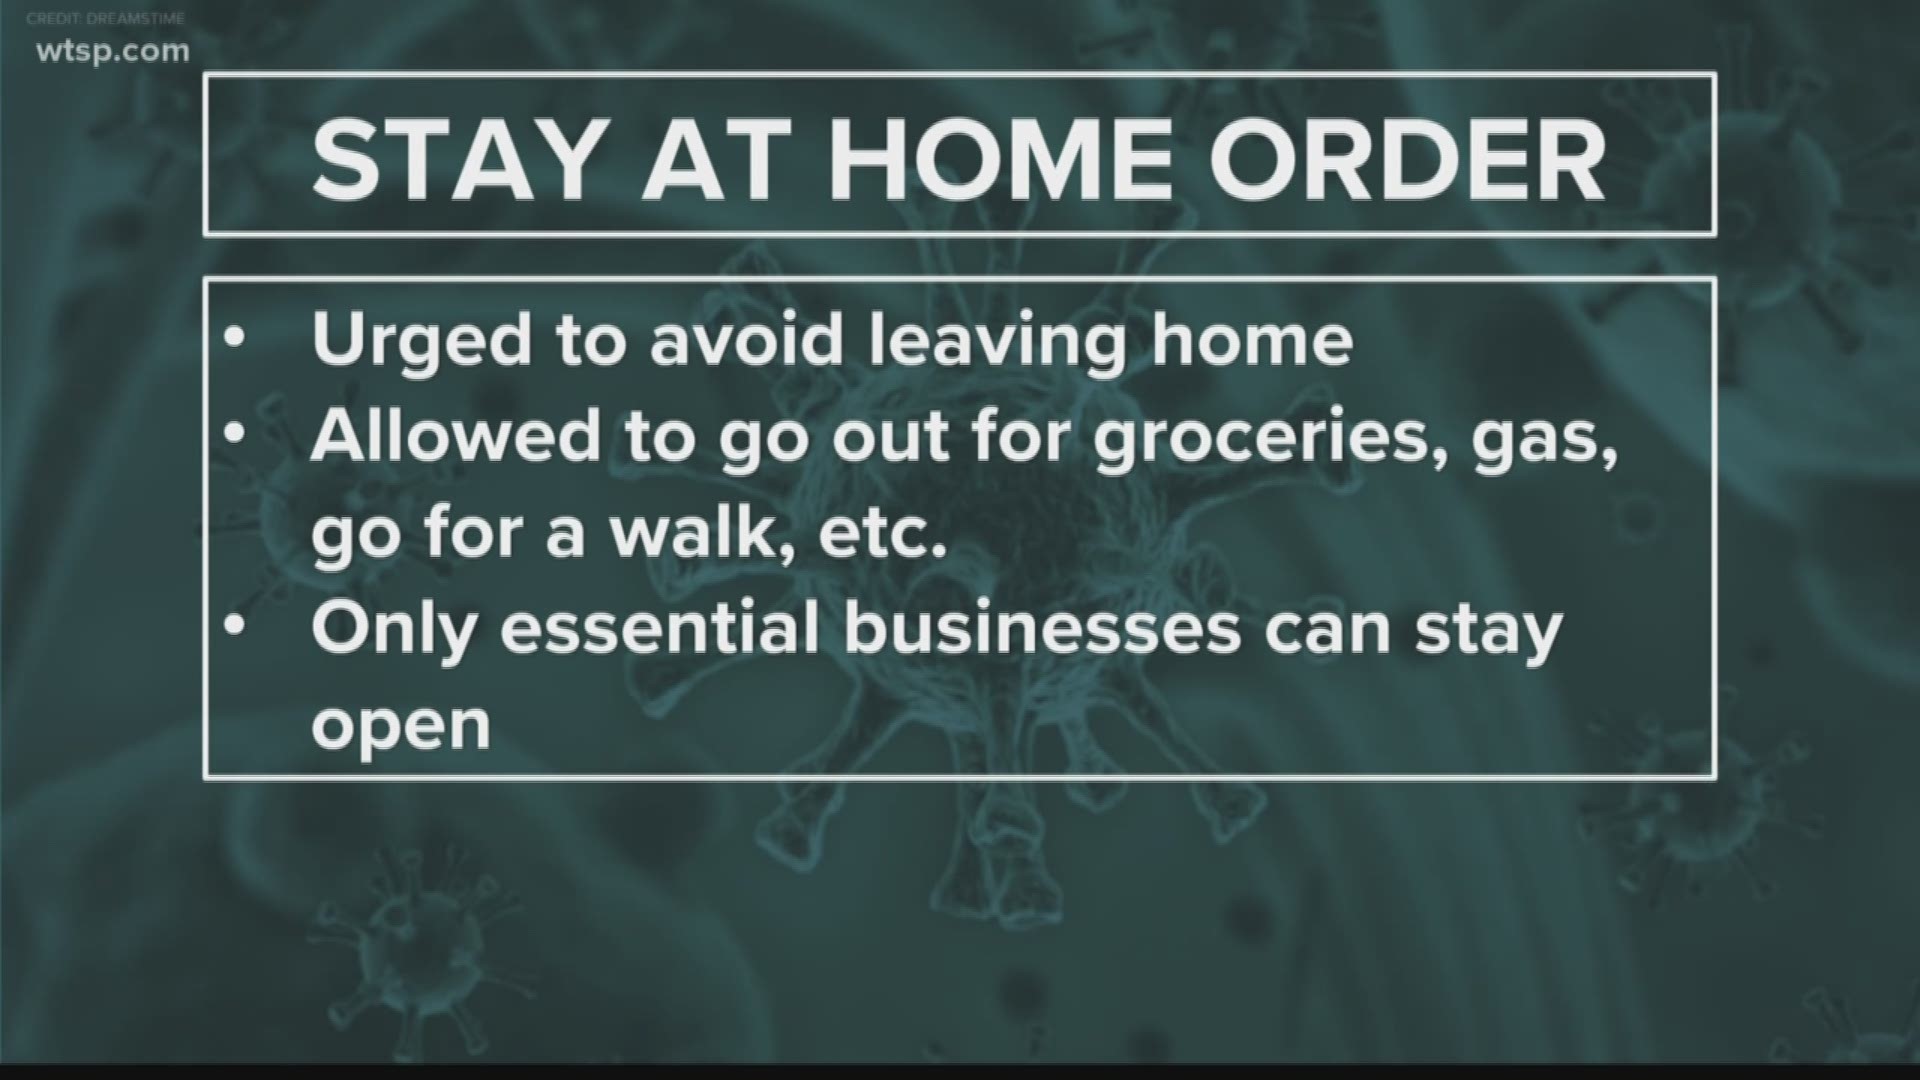 Here's the difference between a "safer-at-home" order and a "stay-at-home" order.